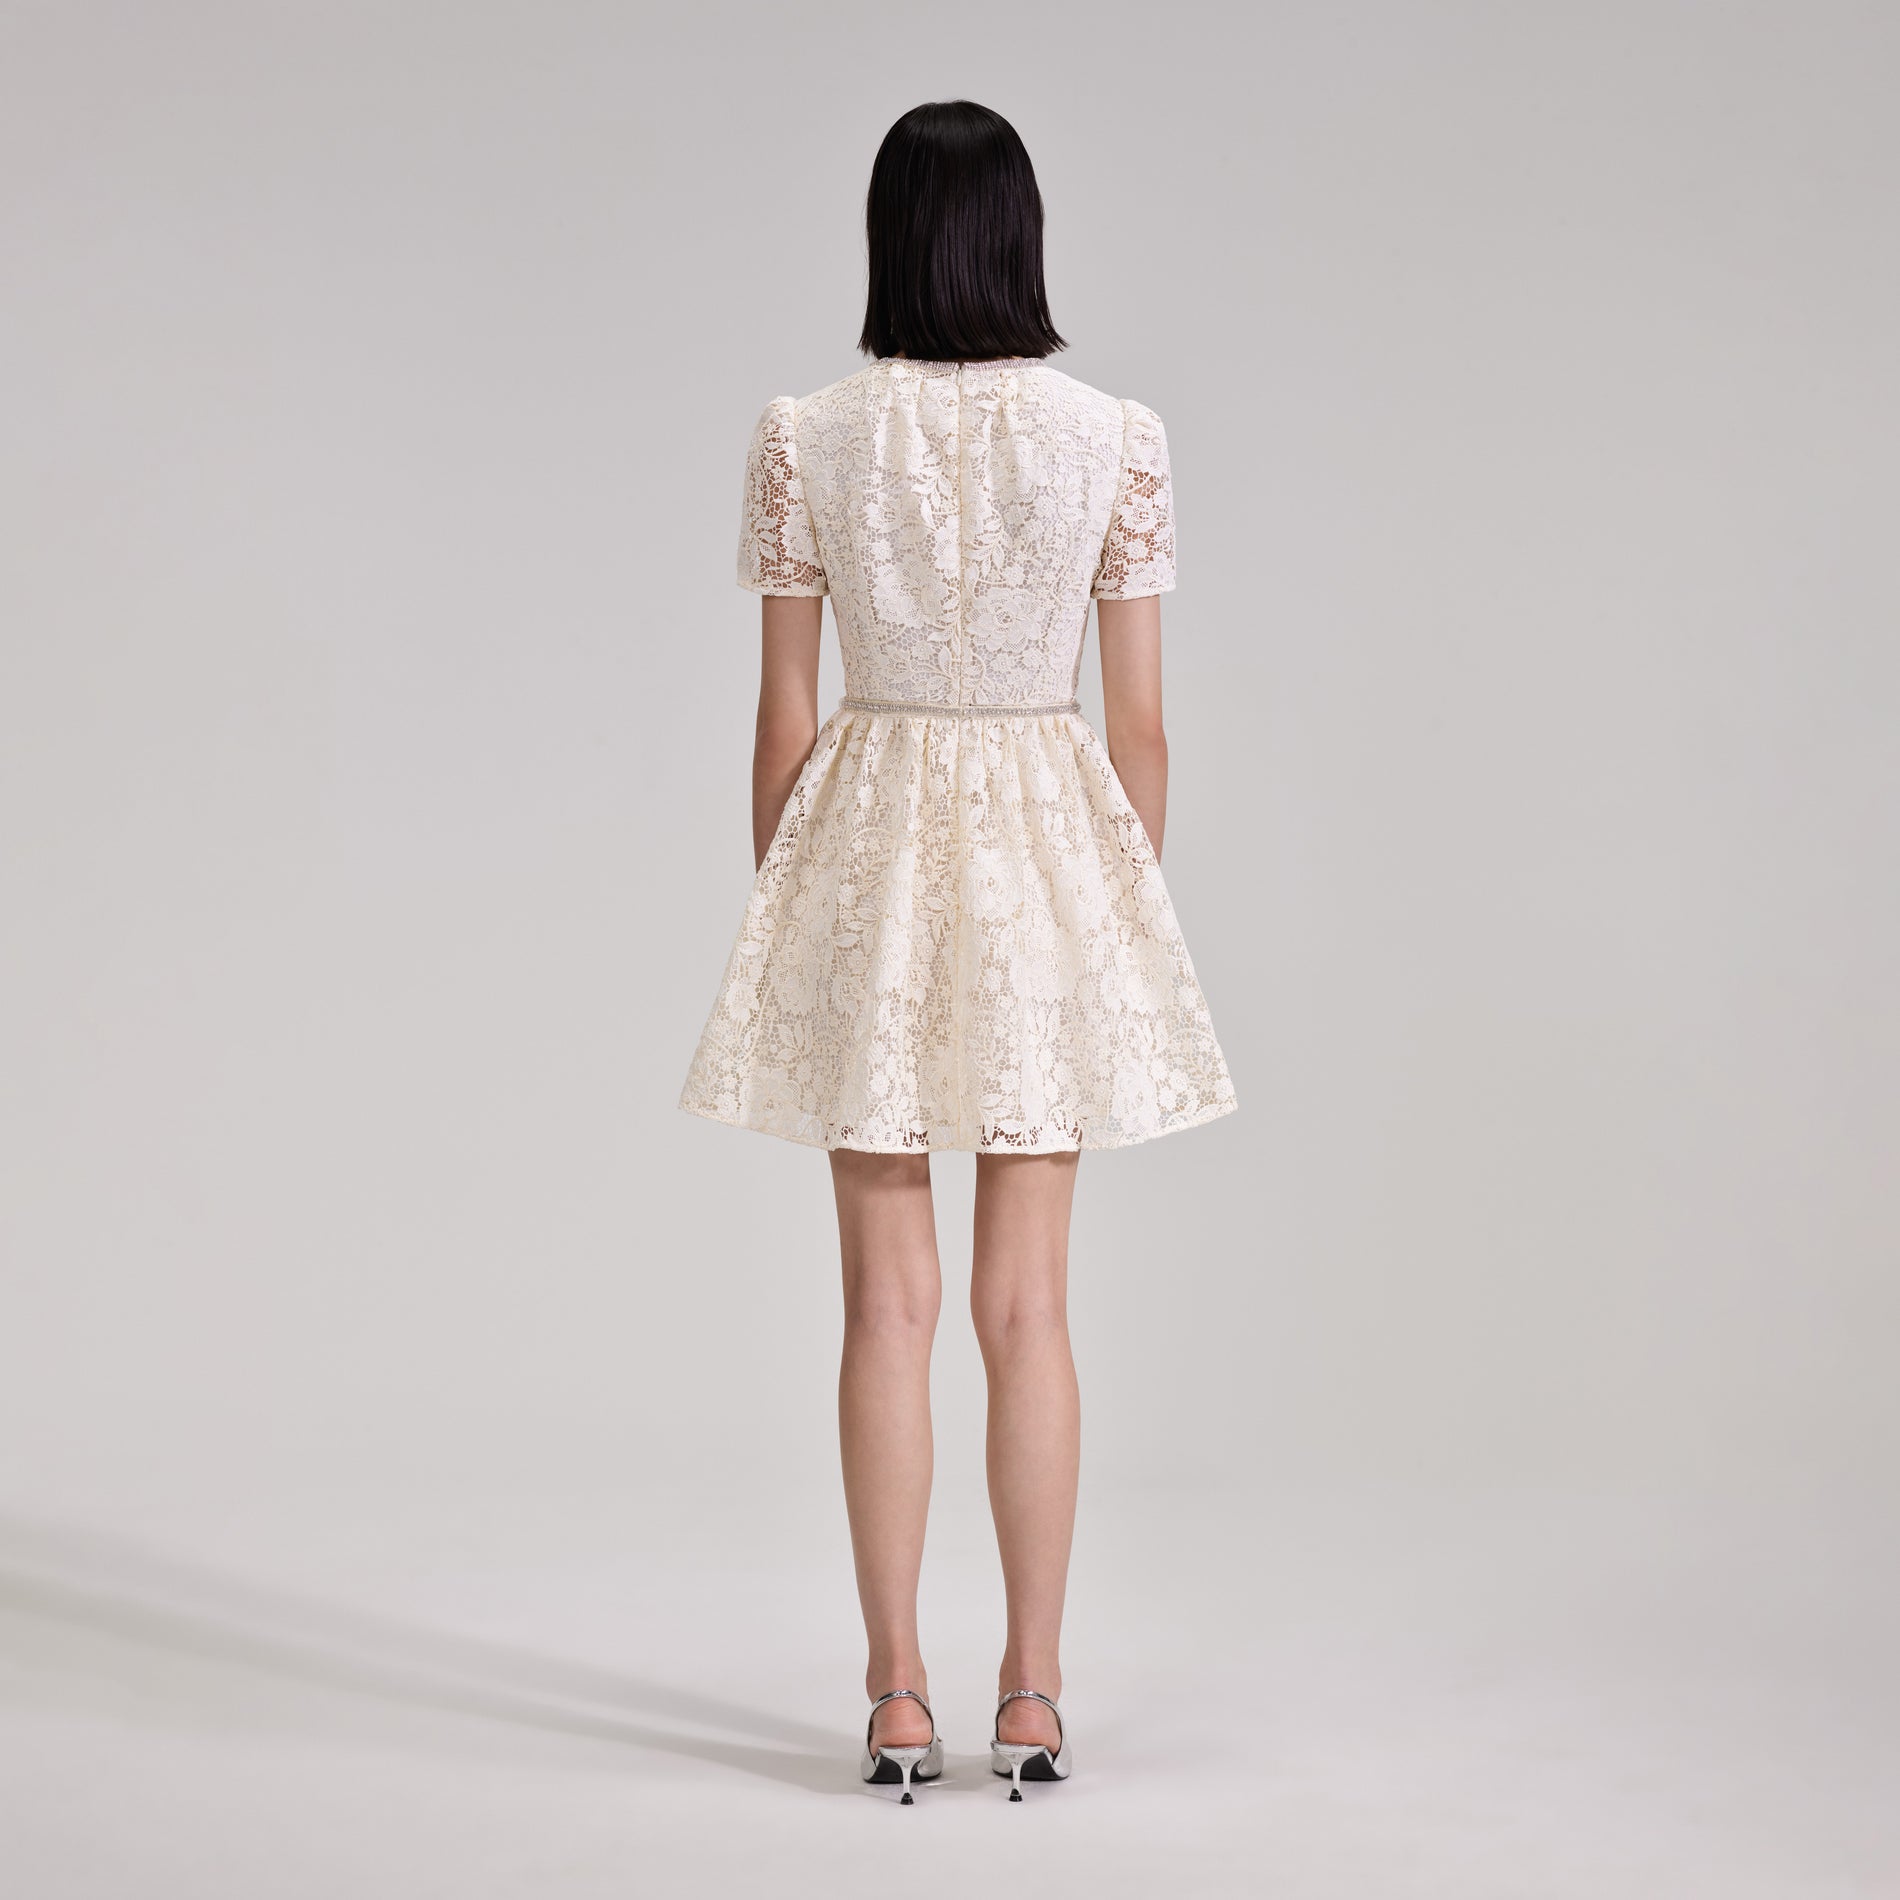 A woman wearing the Cream Cord Lace Bow Mini Dress